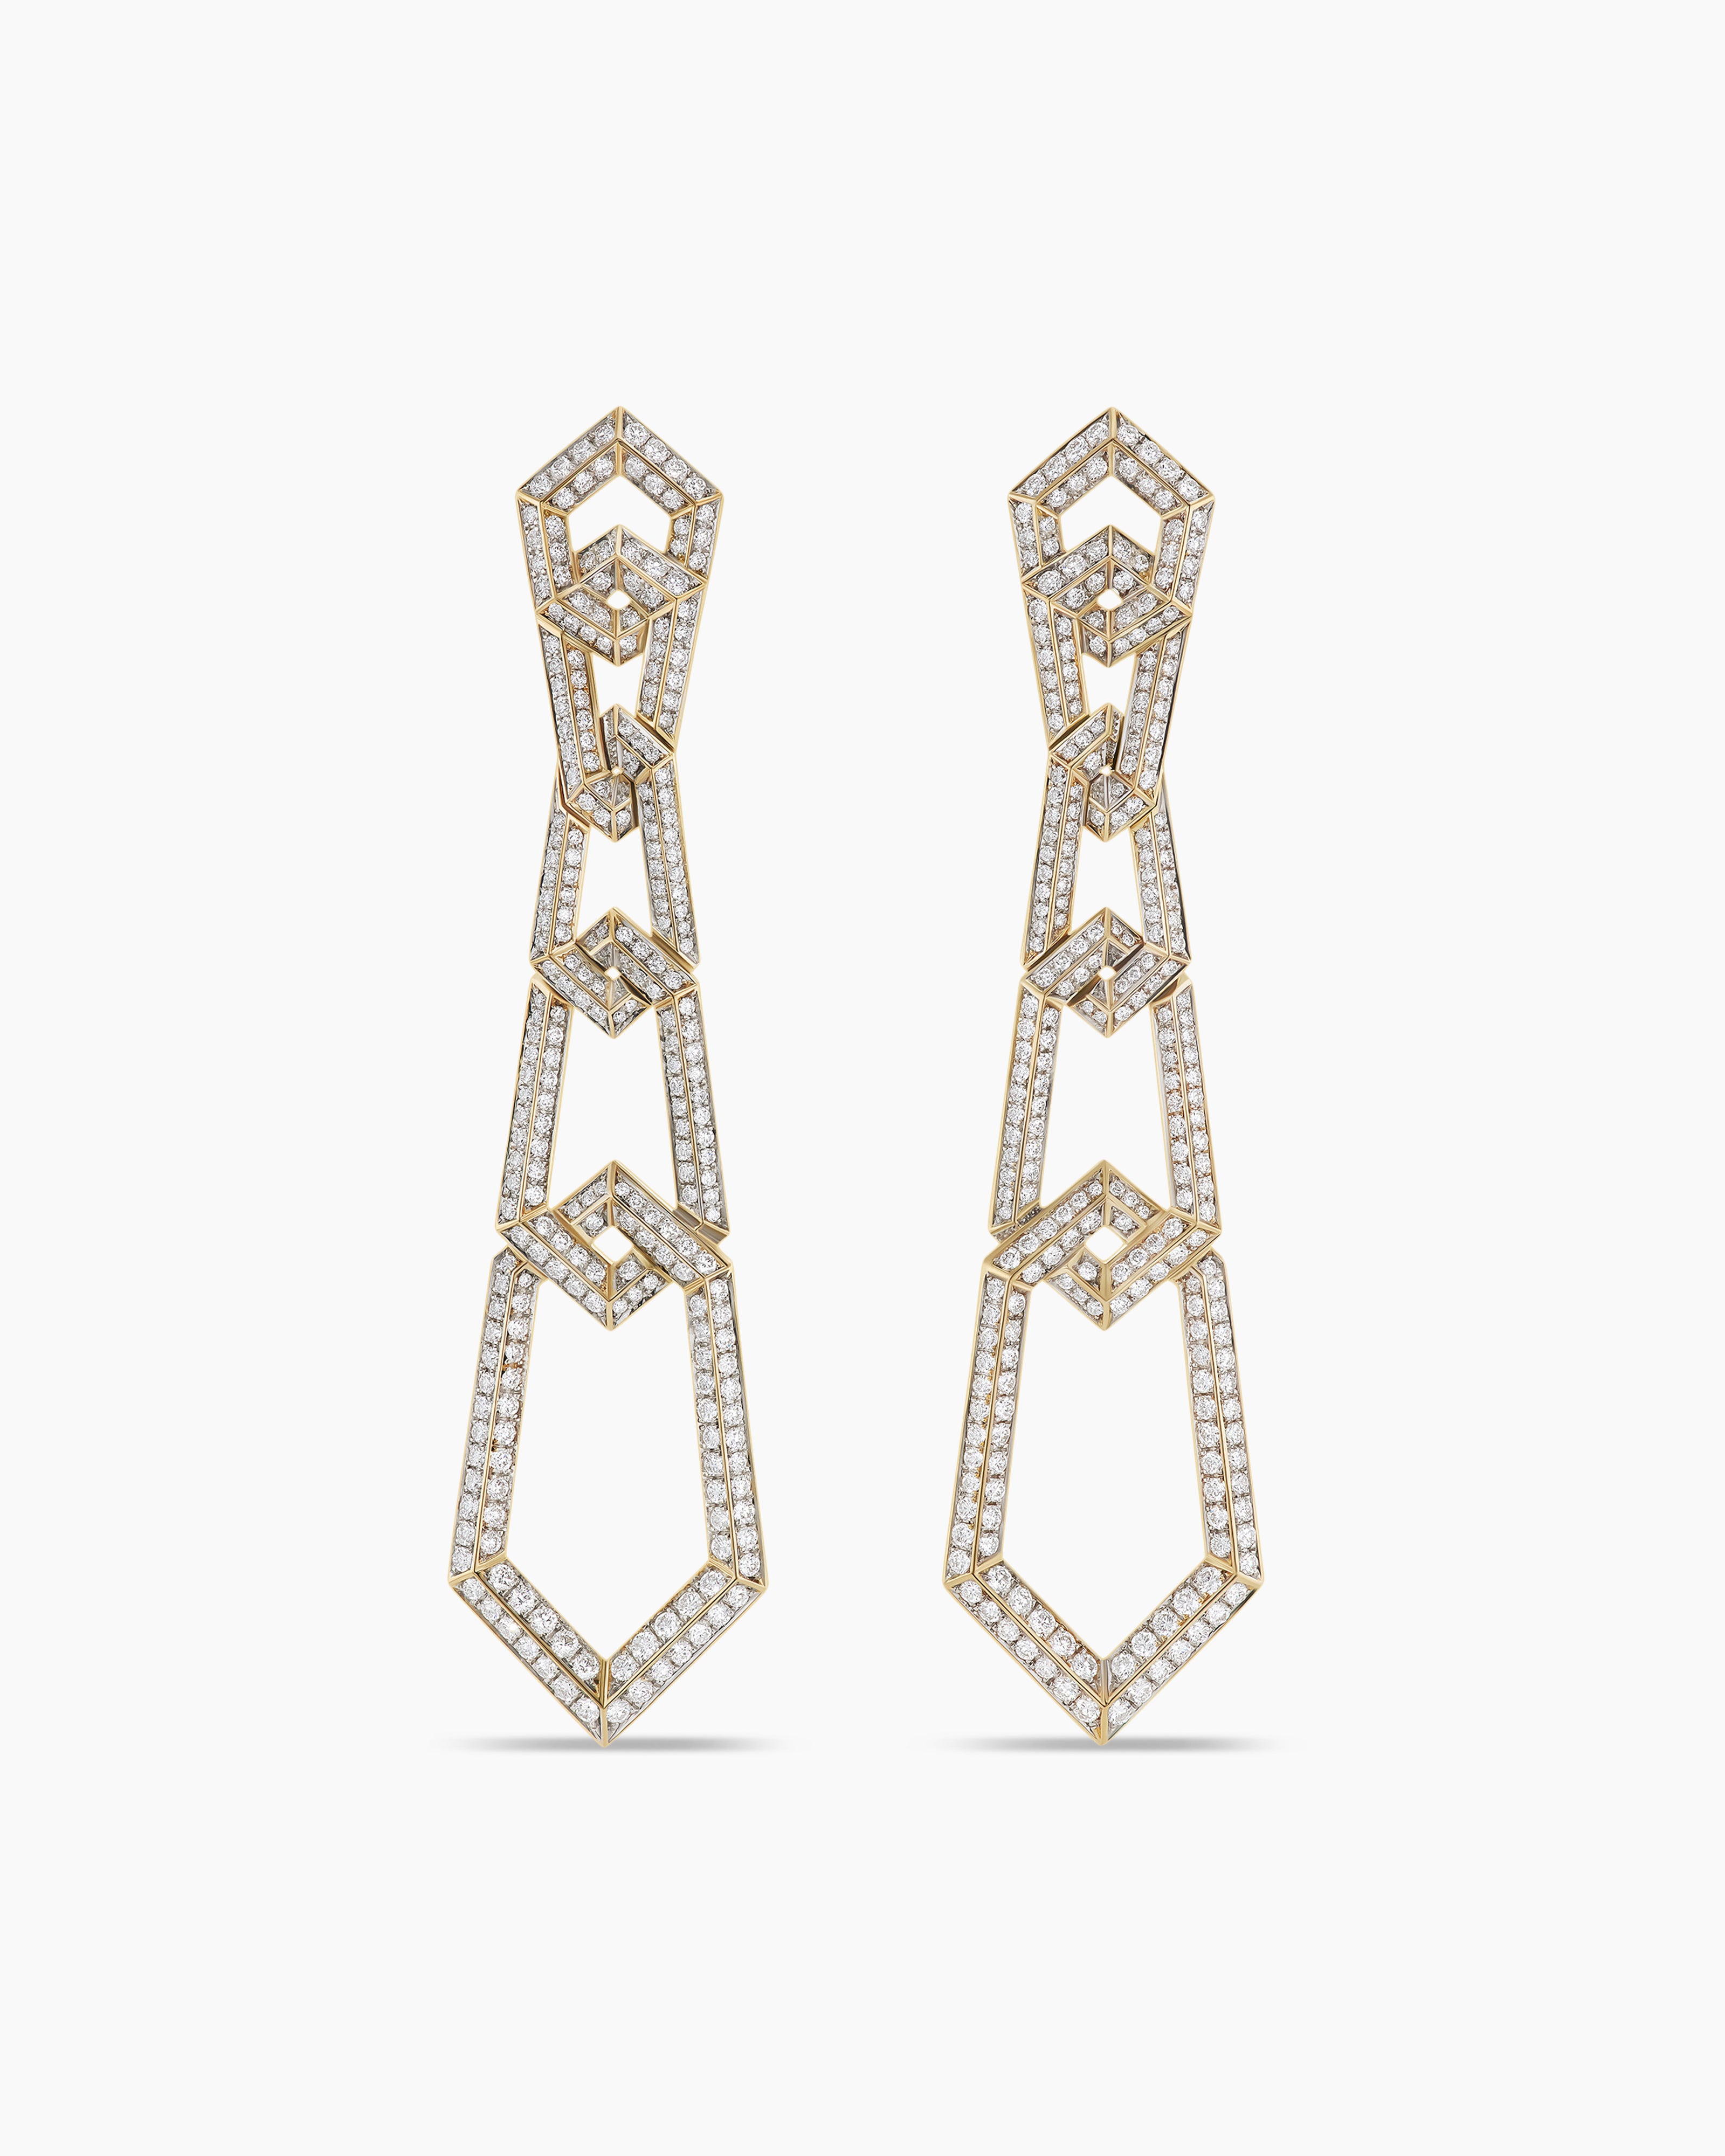 David Yurman Carlyle Linked Drop Earrings in Sterling Silver with 18K Yellow Gold